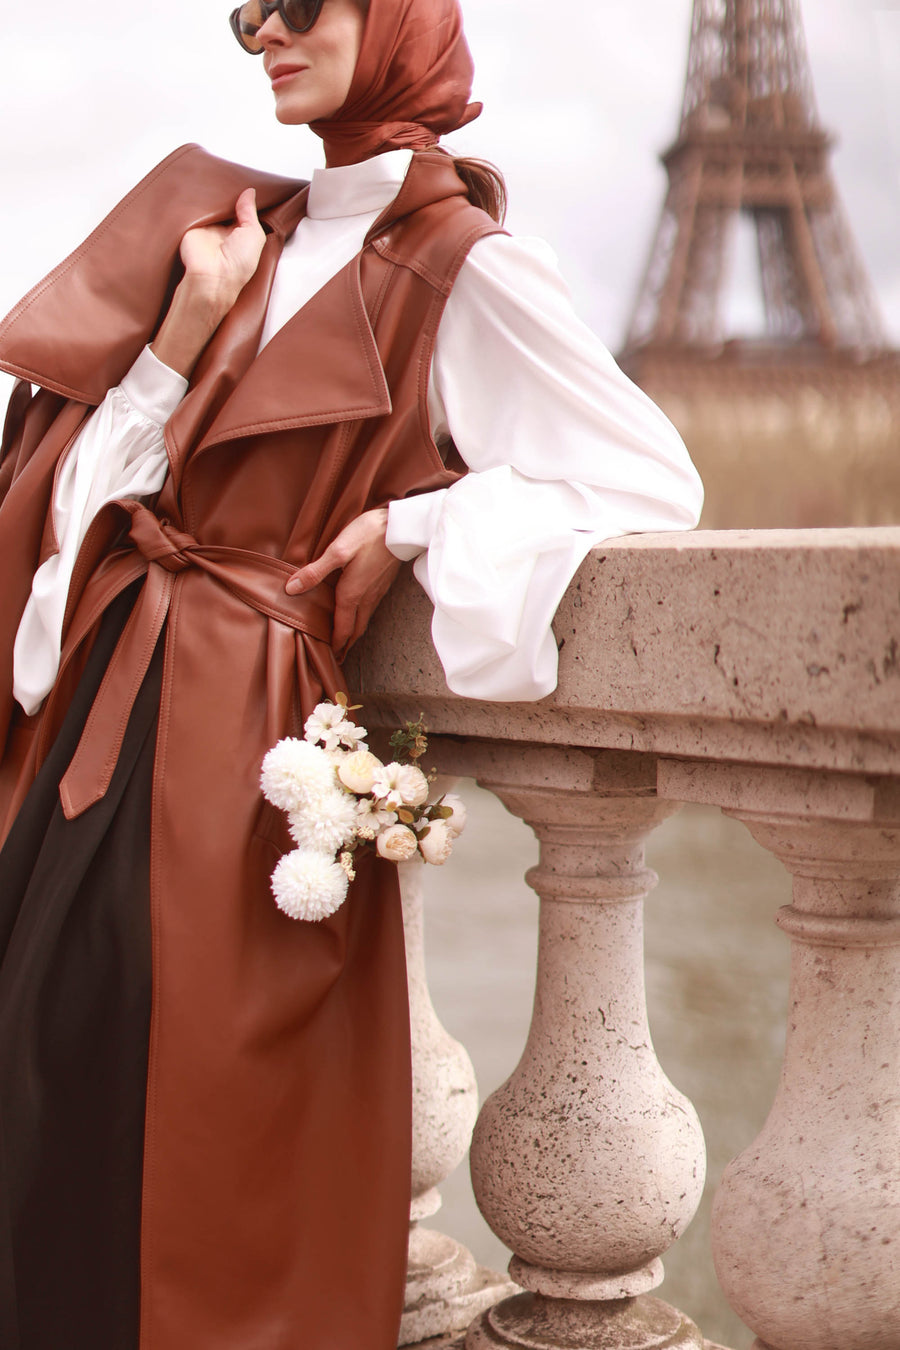 Faux Leather Brown French Trench